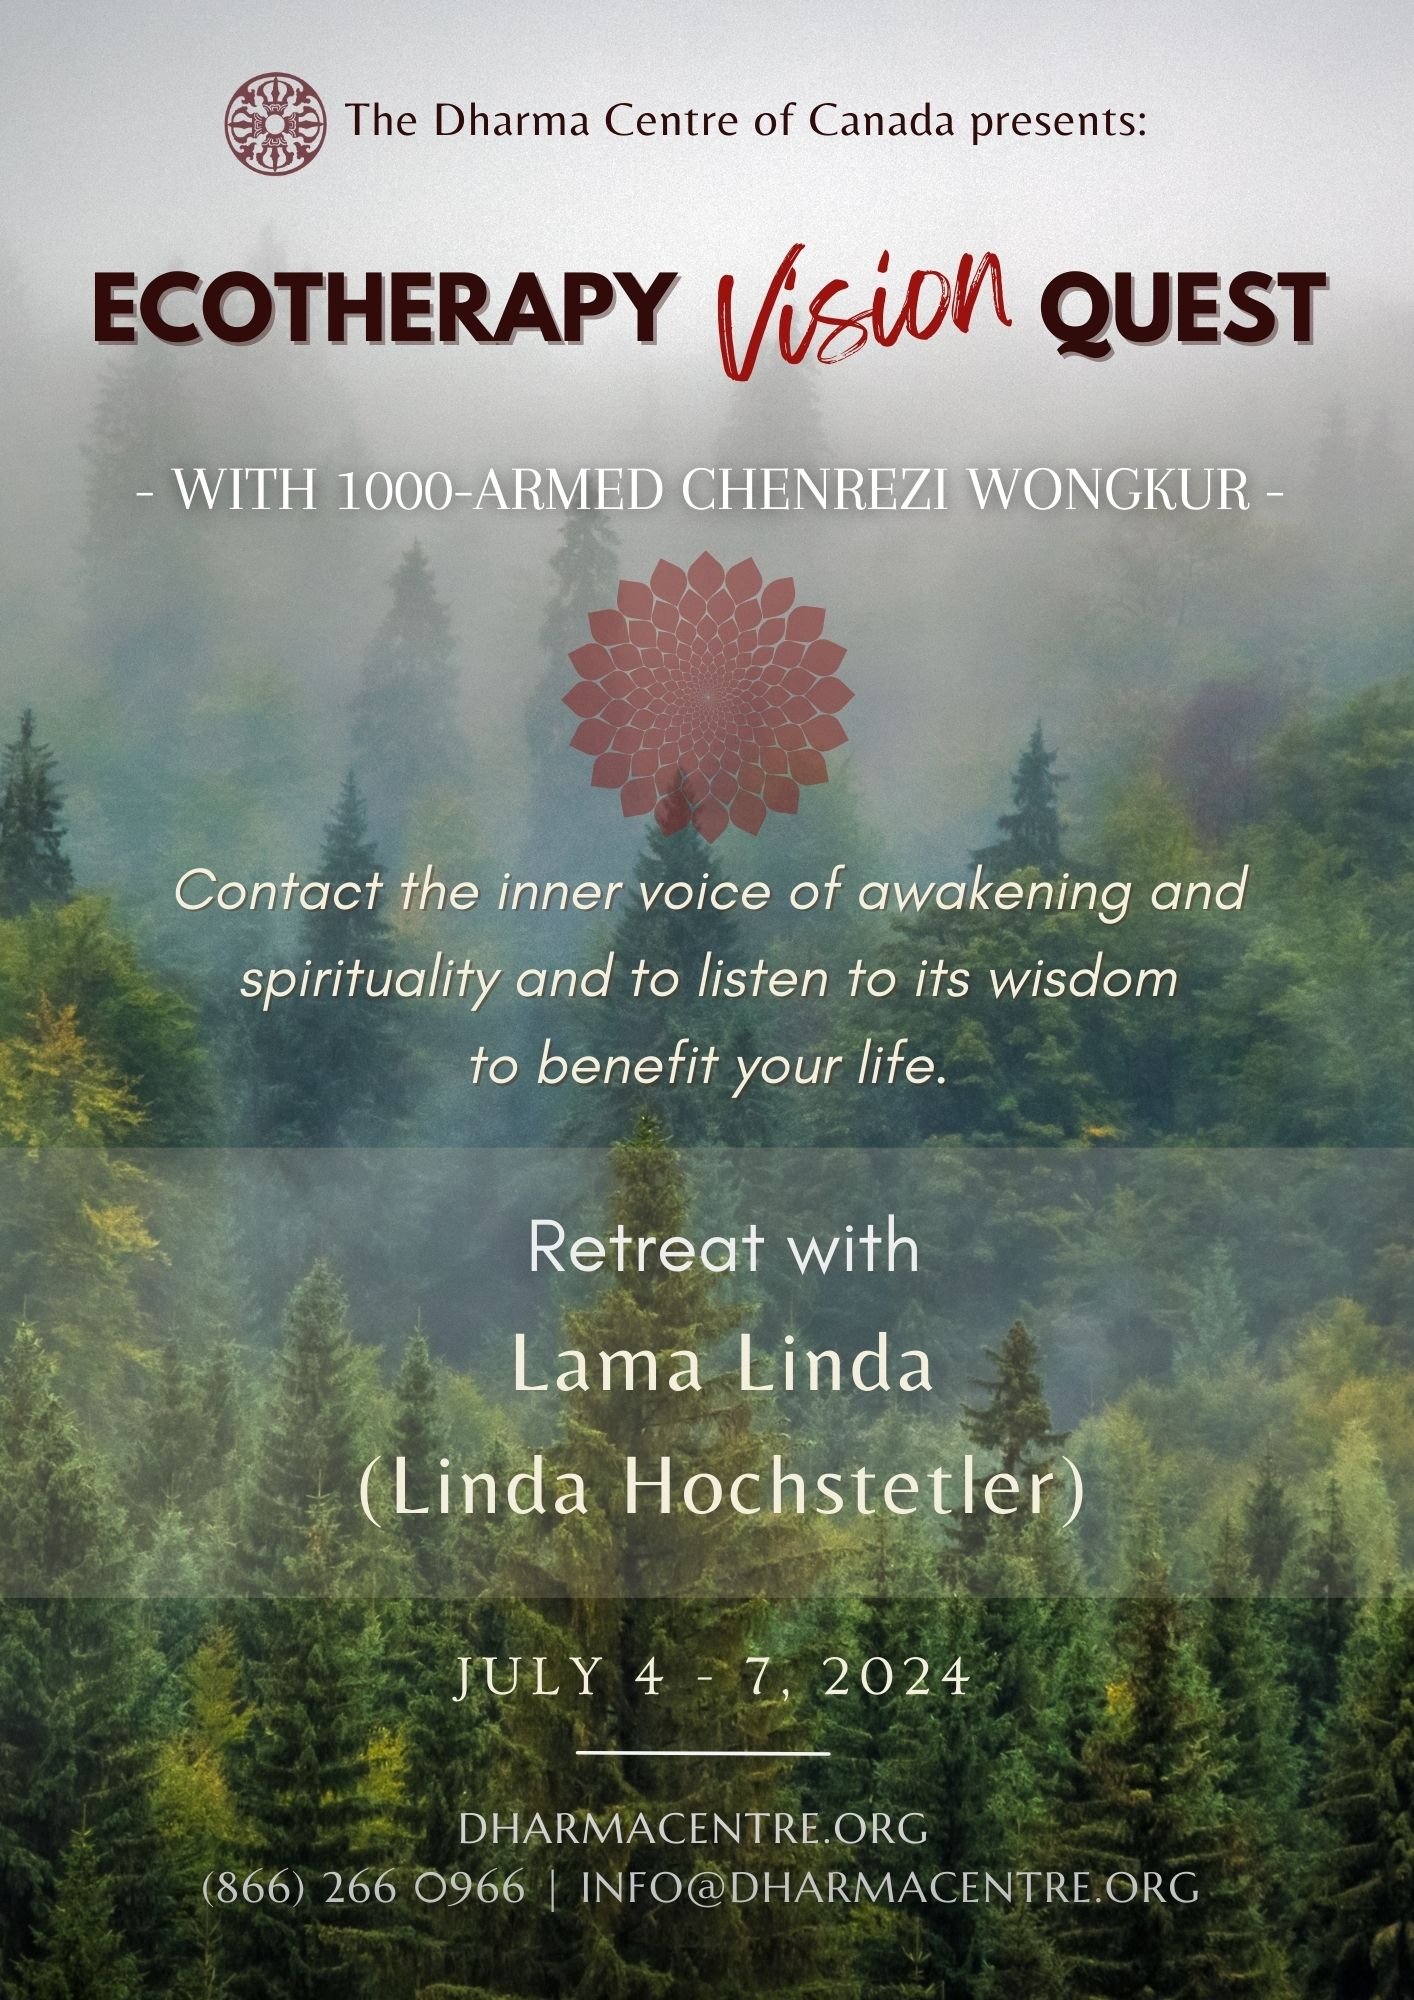 July 4-7: Ecotherapy Vision Quest